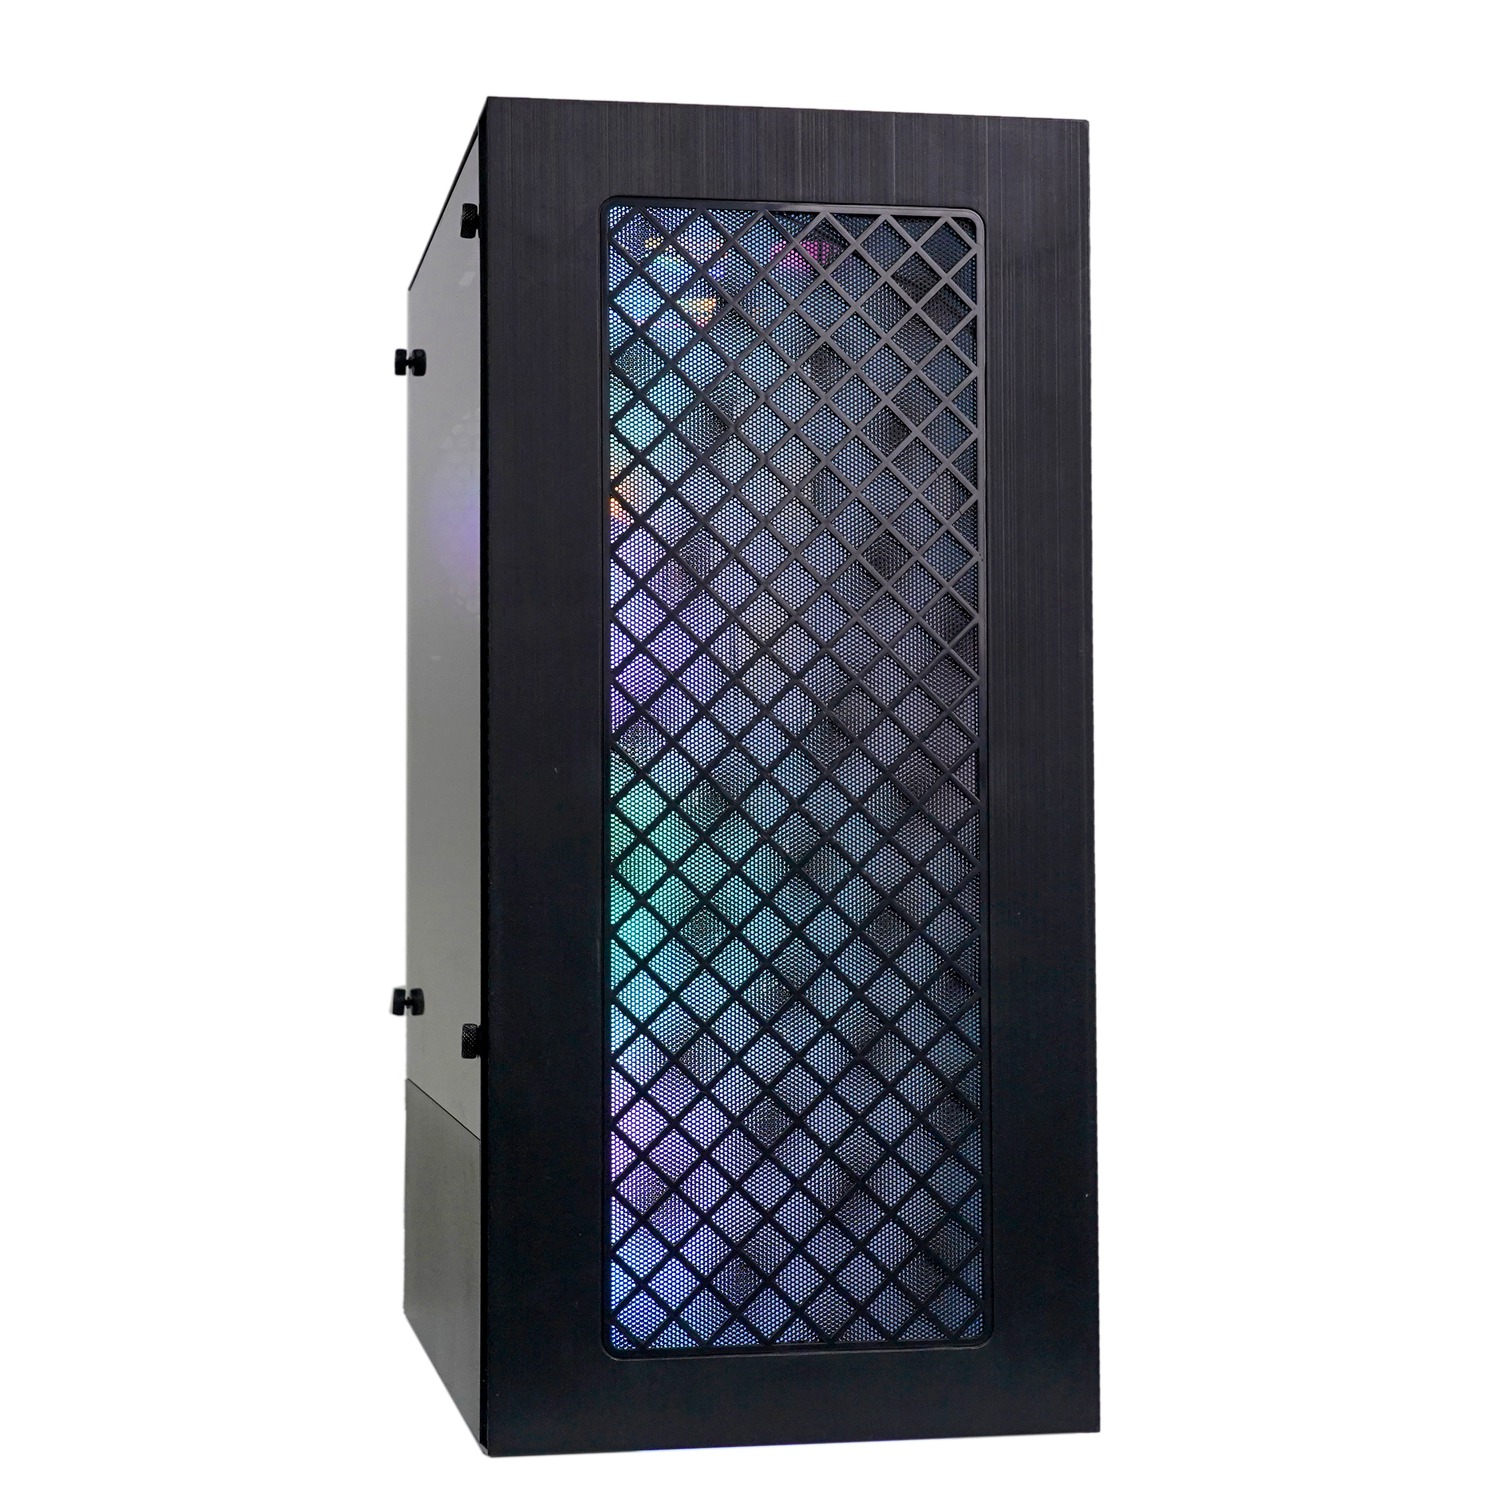 New Front lamp board  ATX Computer Gaming Case Fixed Color fan,  Desktop Case